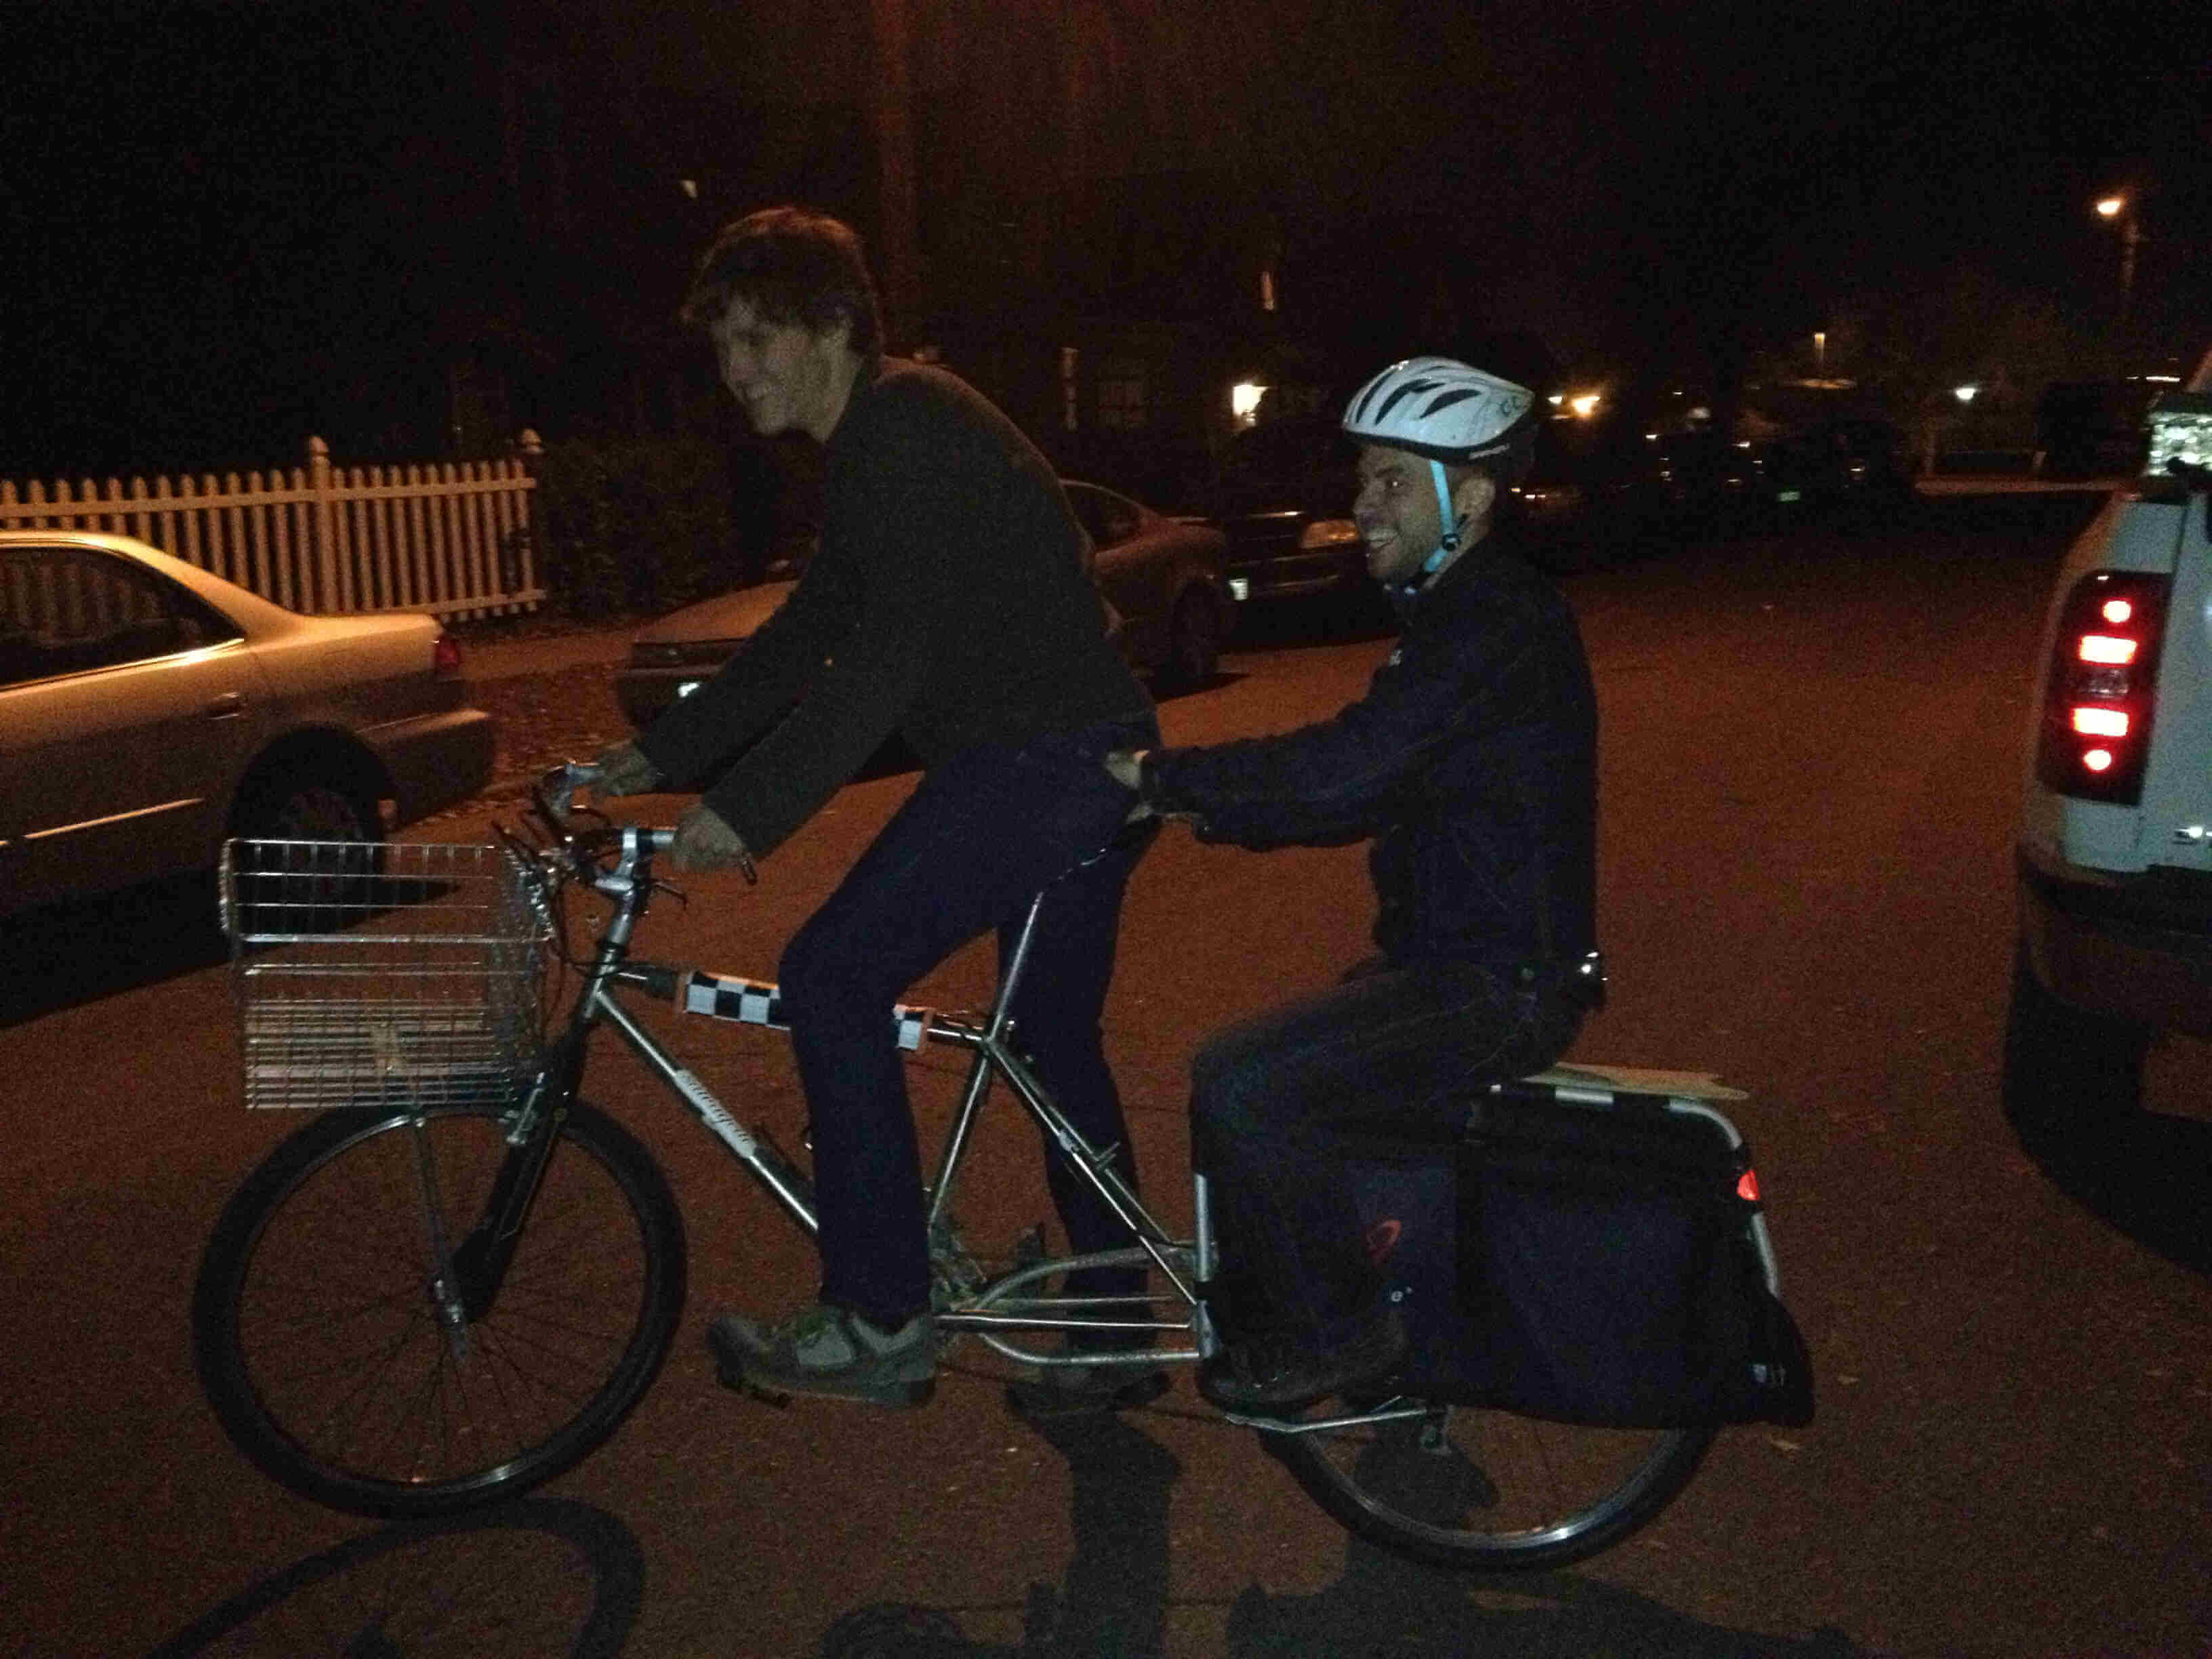 Right side view of a silver Surly Big Dummy bike, with a cyclist driving, and a person on back, on a street at night